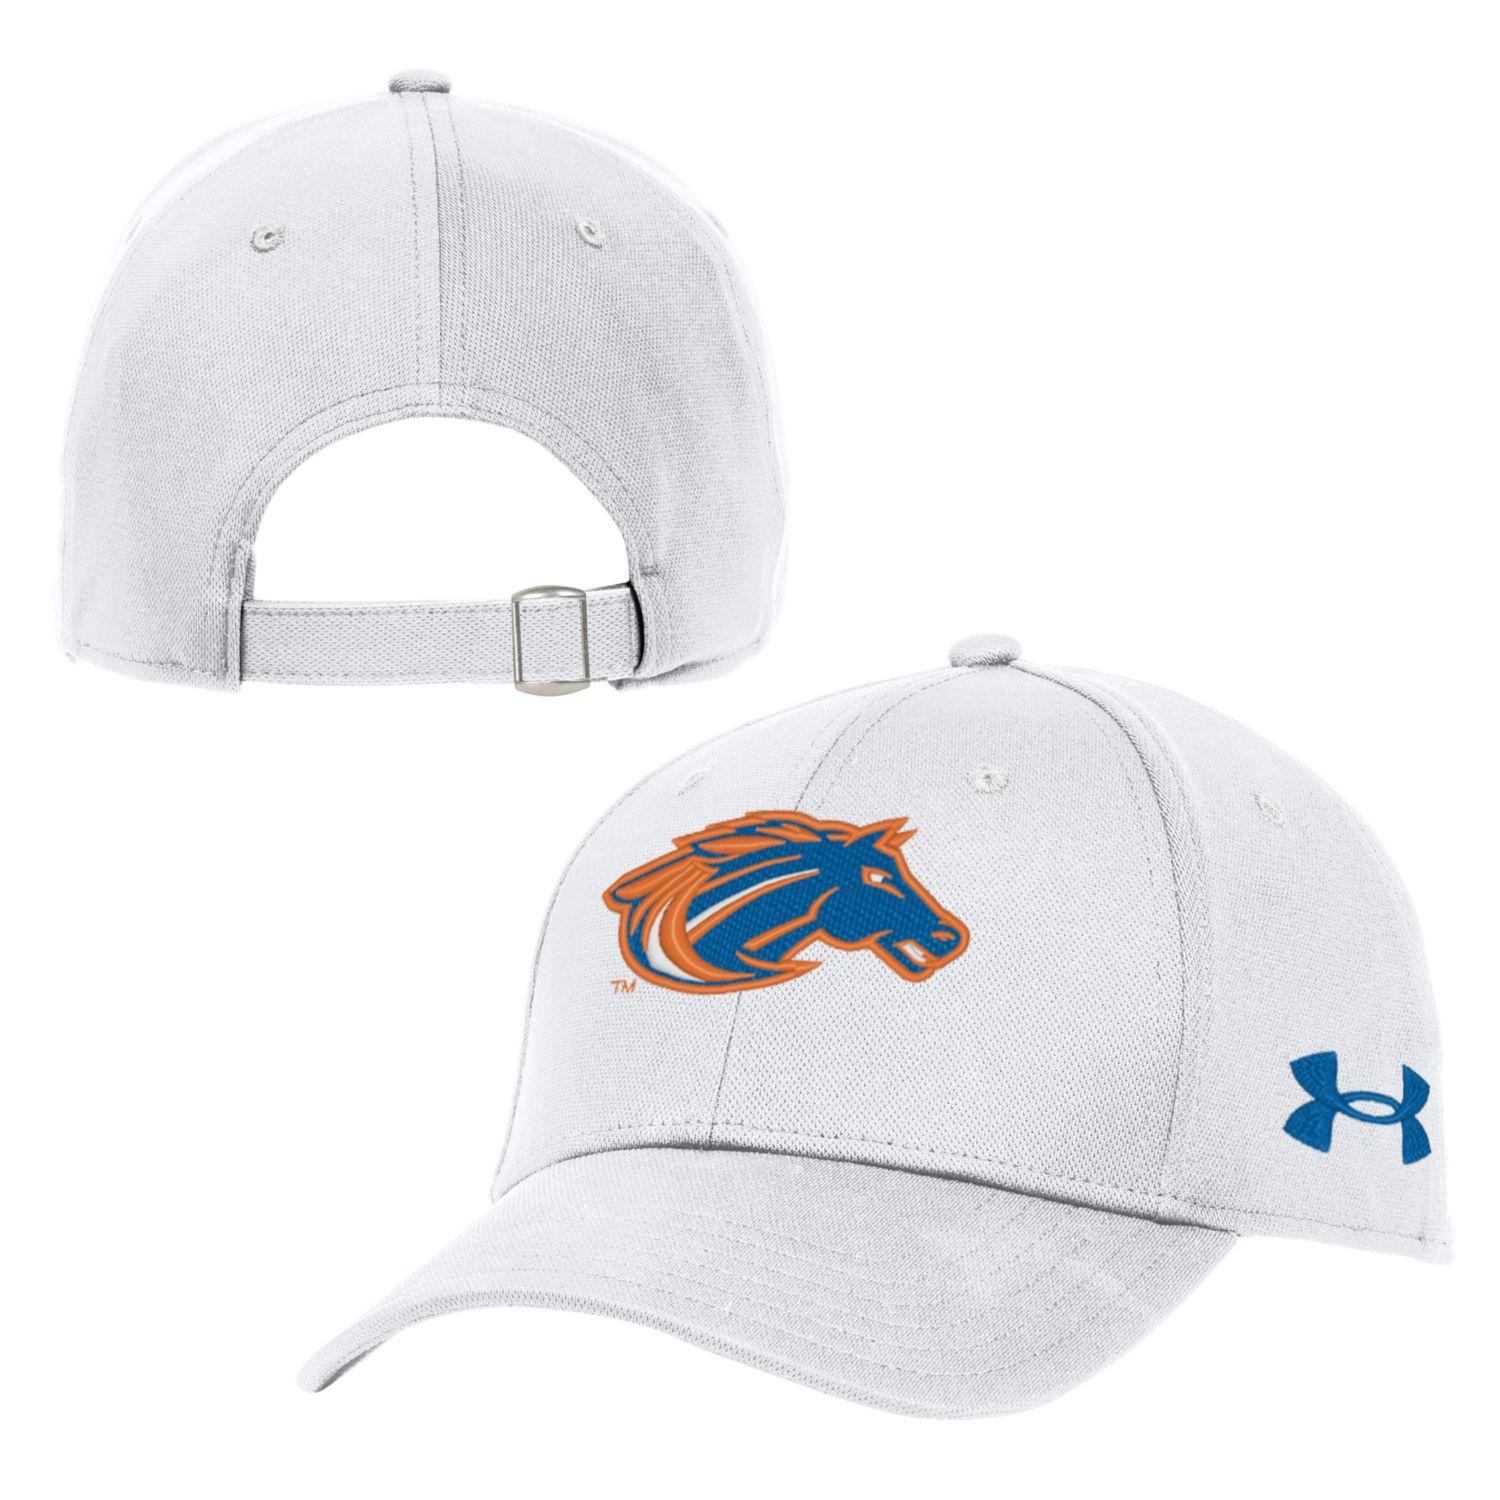 Under Armour Mens Hat (23-24)  The Mustang Stable @ Sheyenne High